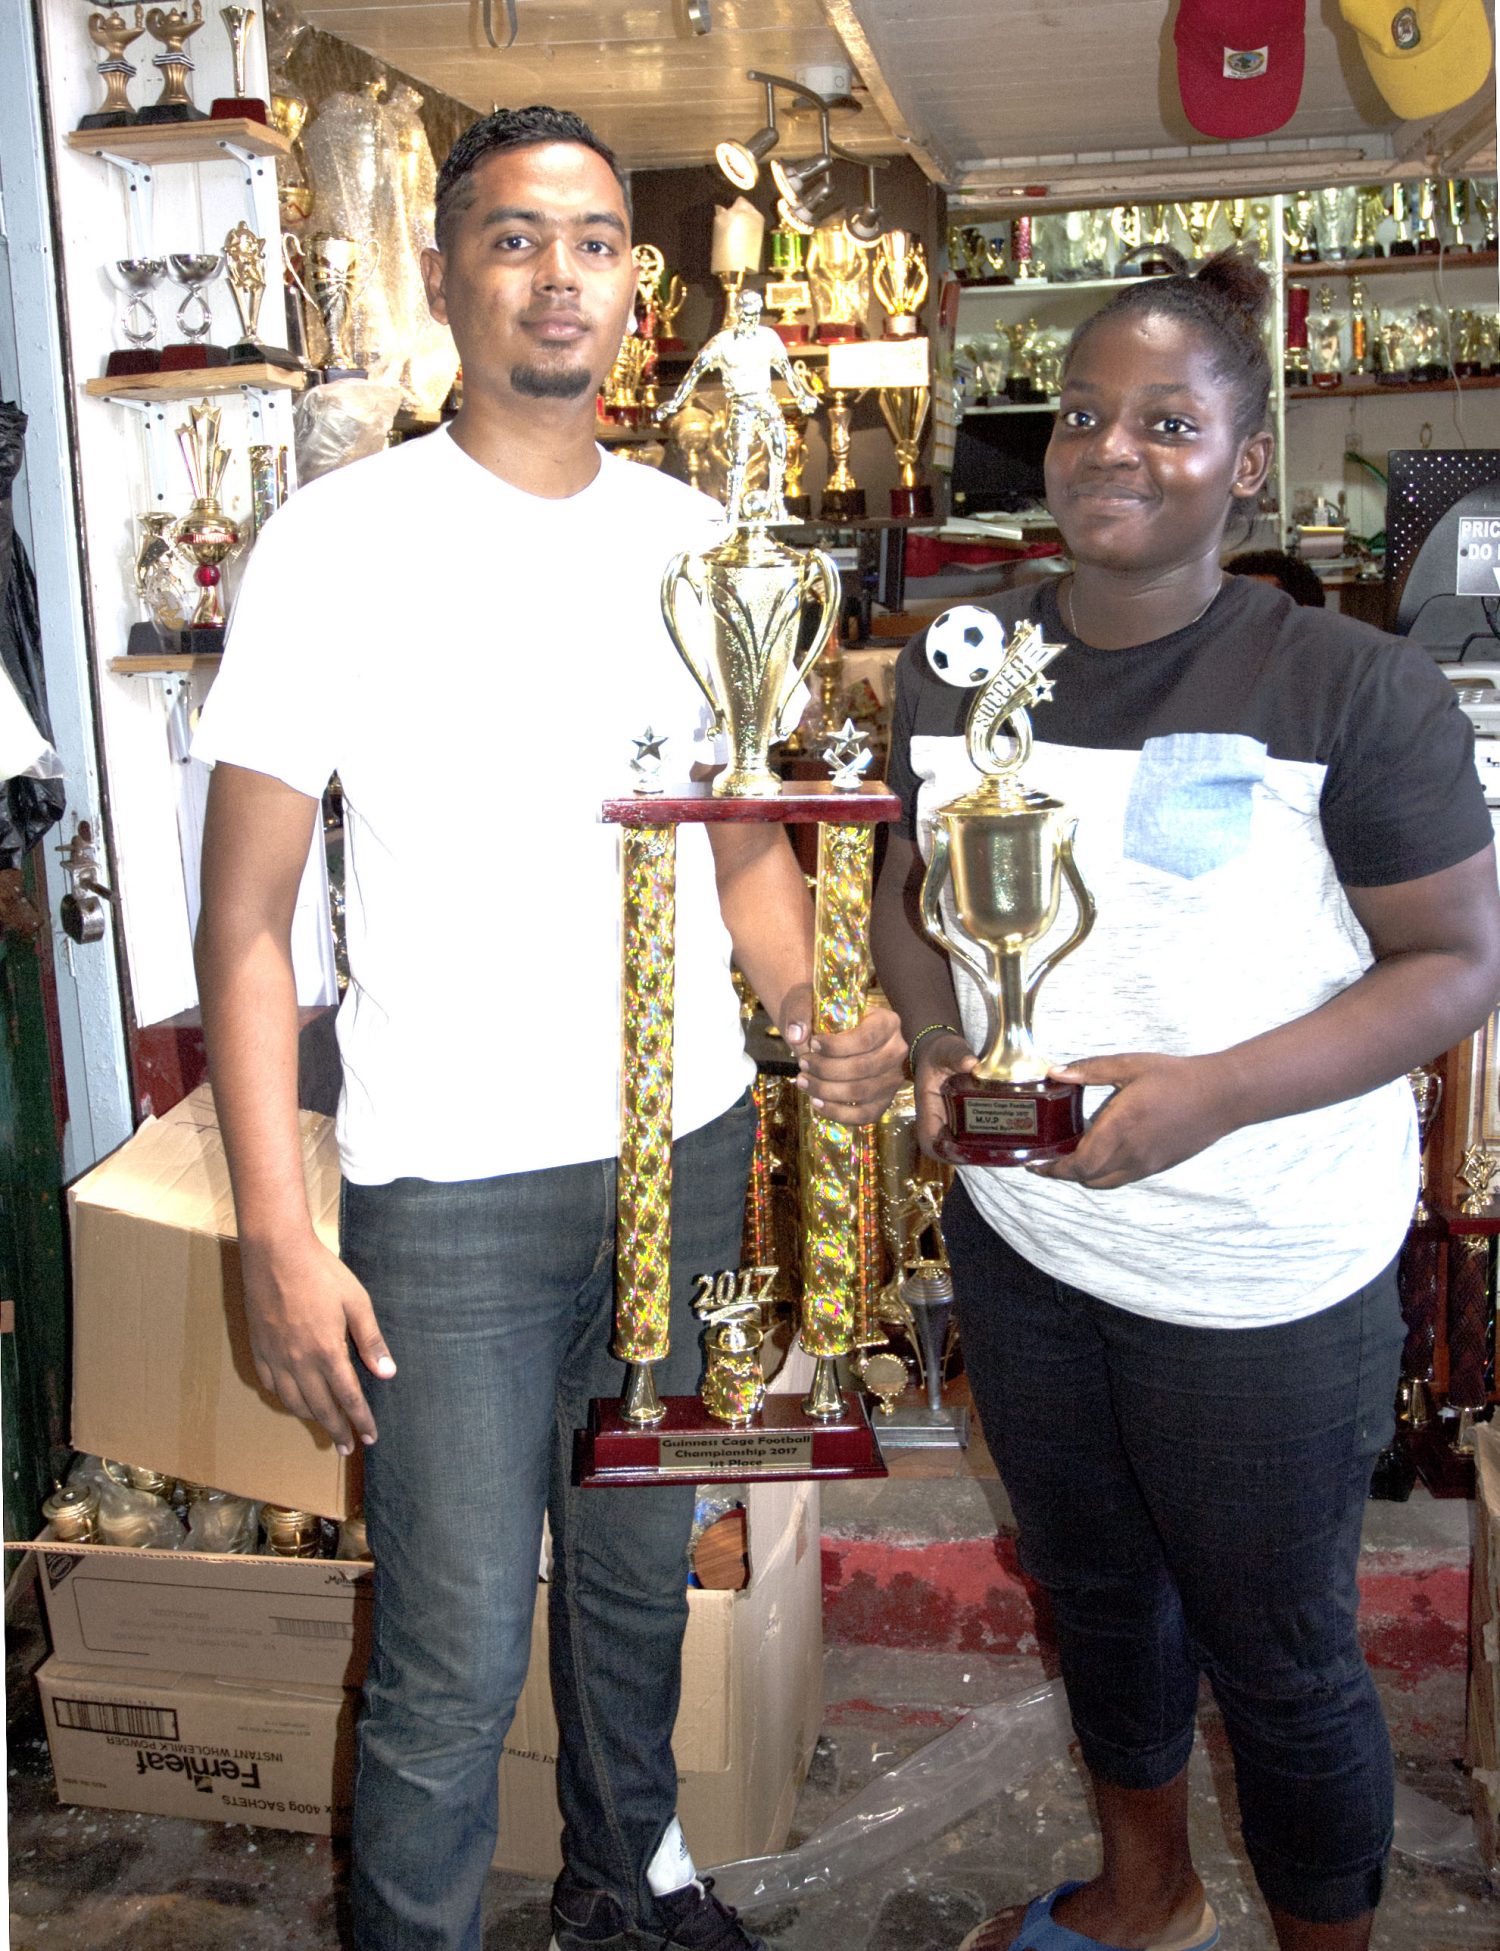 Trophy Stall continued their long standing support of local sports by donating the winner’s and fourth place trophies, as well as the most valuable player accolade, for the upcoming Guinness ‘Cage Football Championship’. Representatives Stephen Persaud and Kendra Massiah display the trophies. 